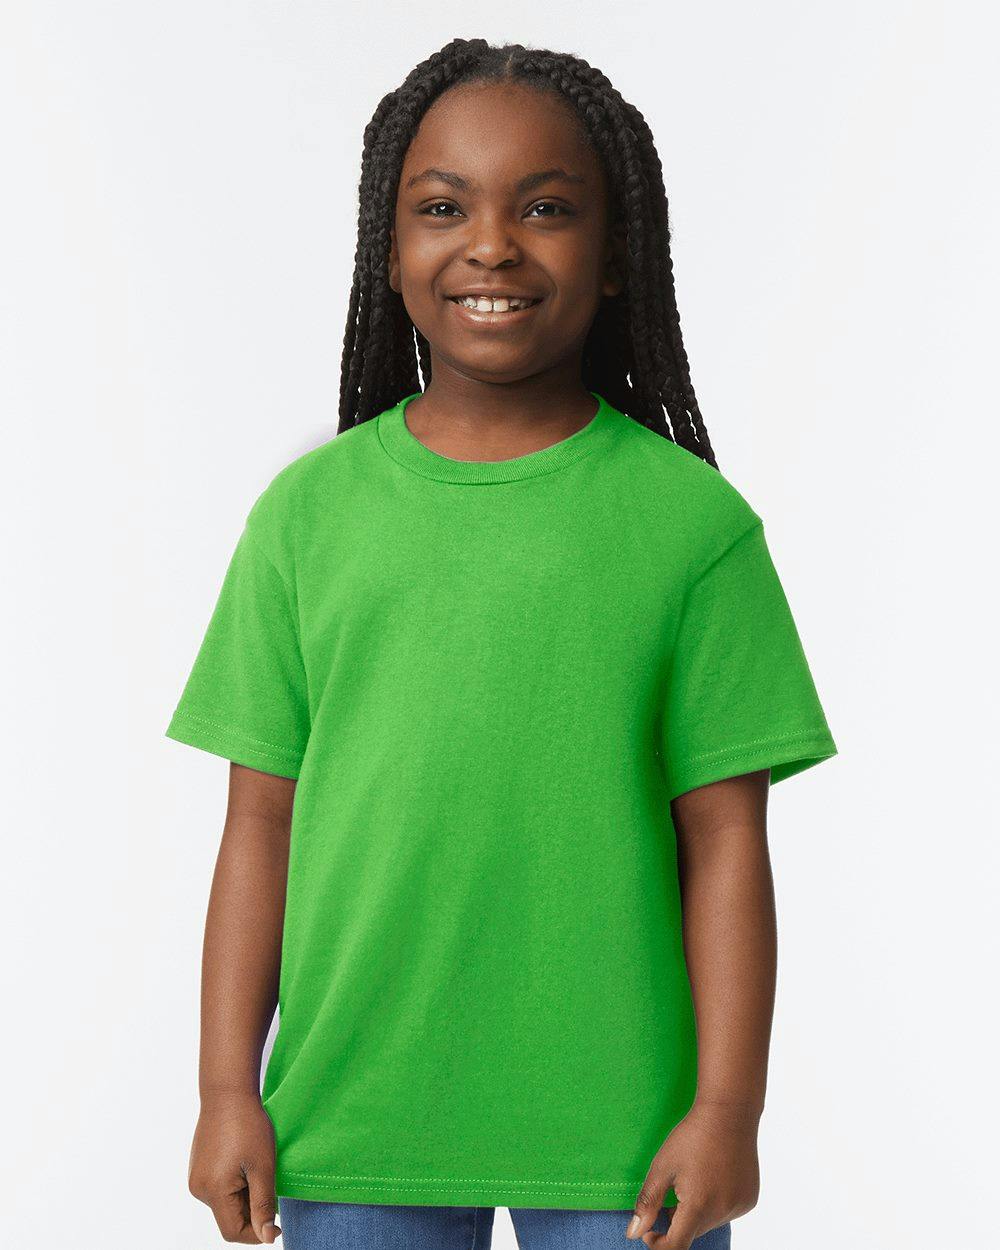 Image for DryBlend® Youth T-Shirt - 8000B